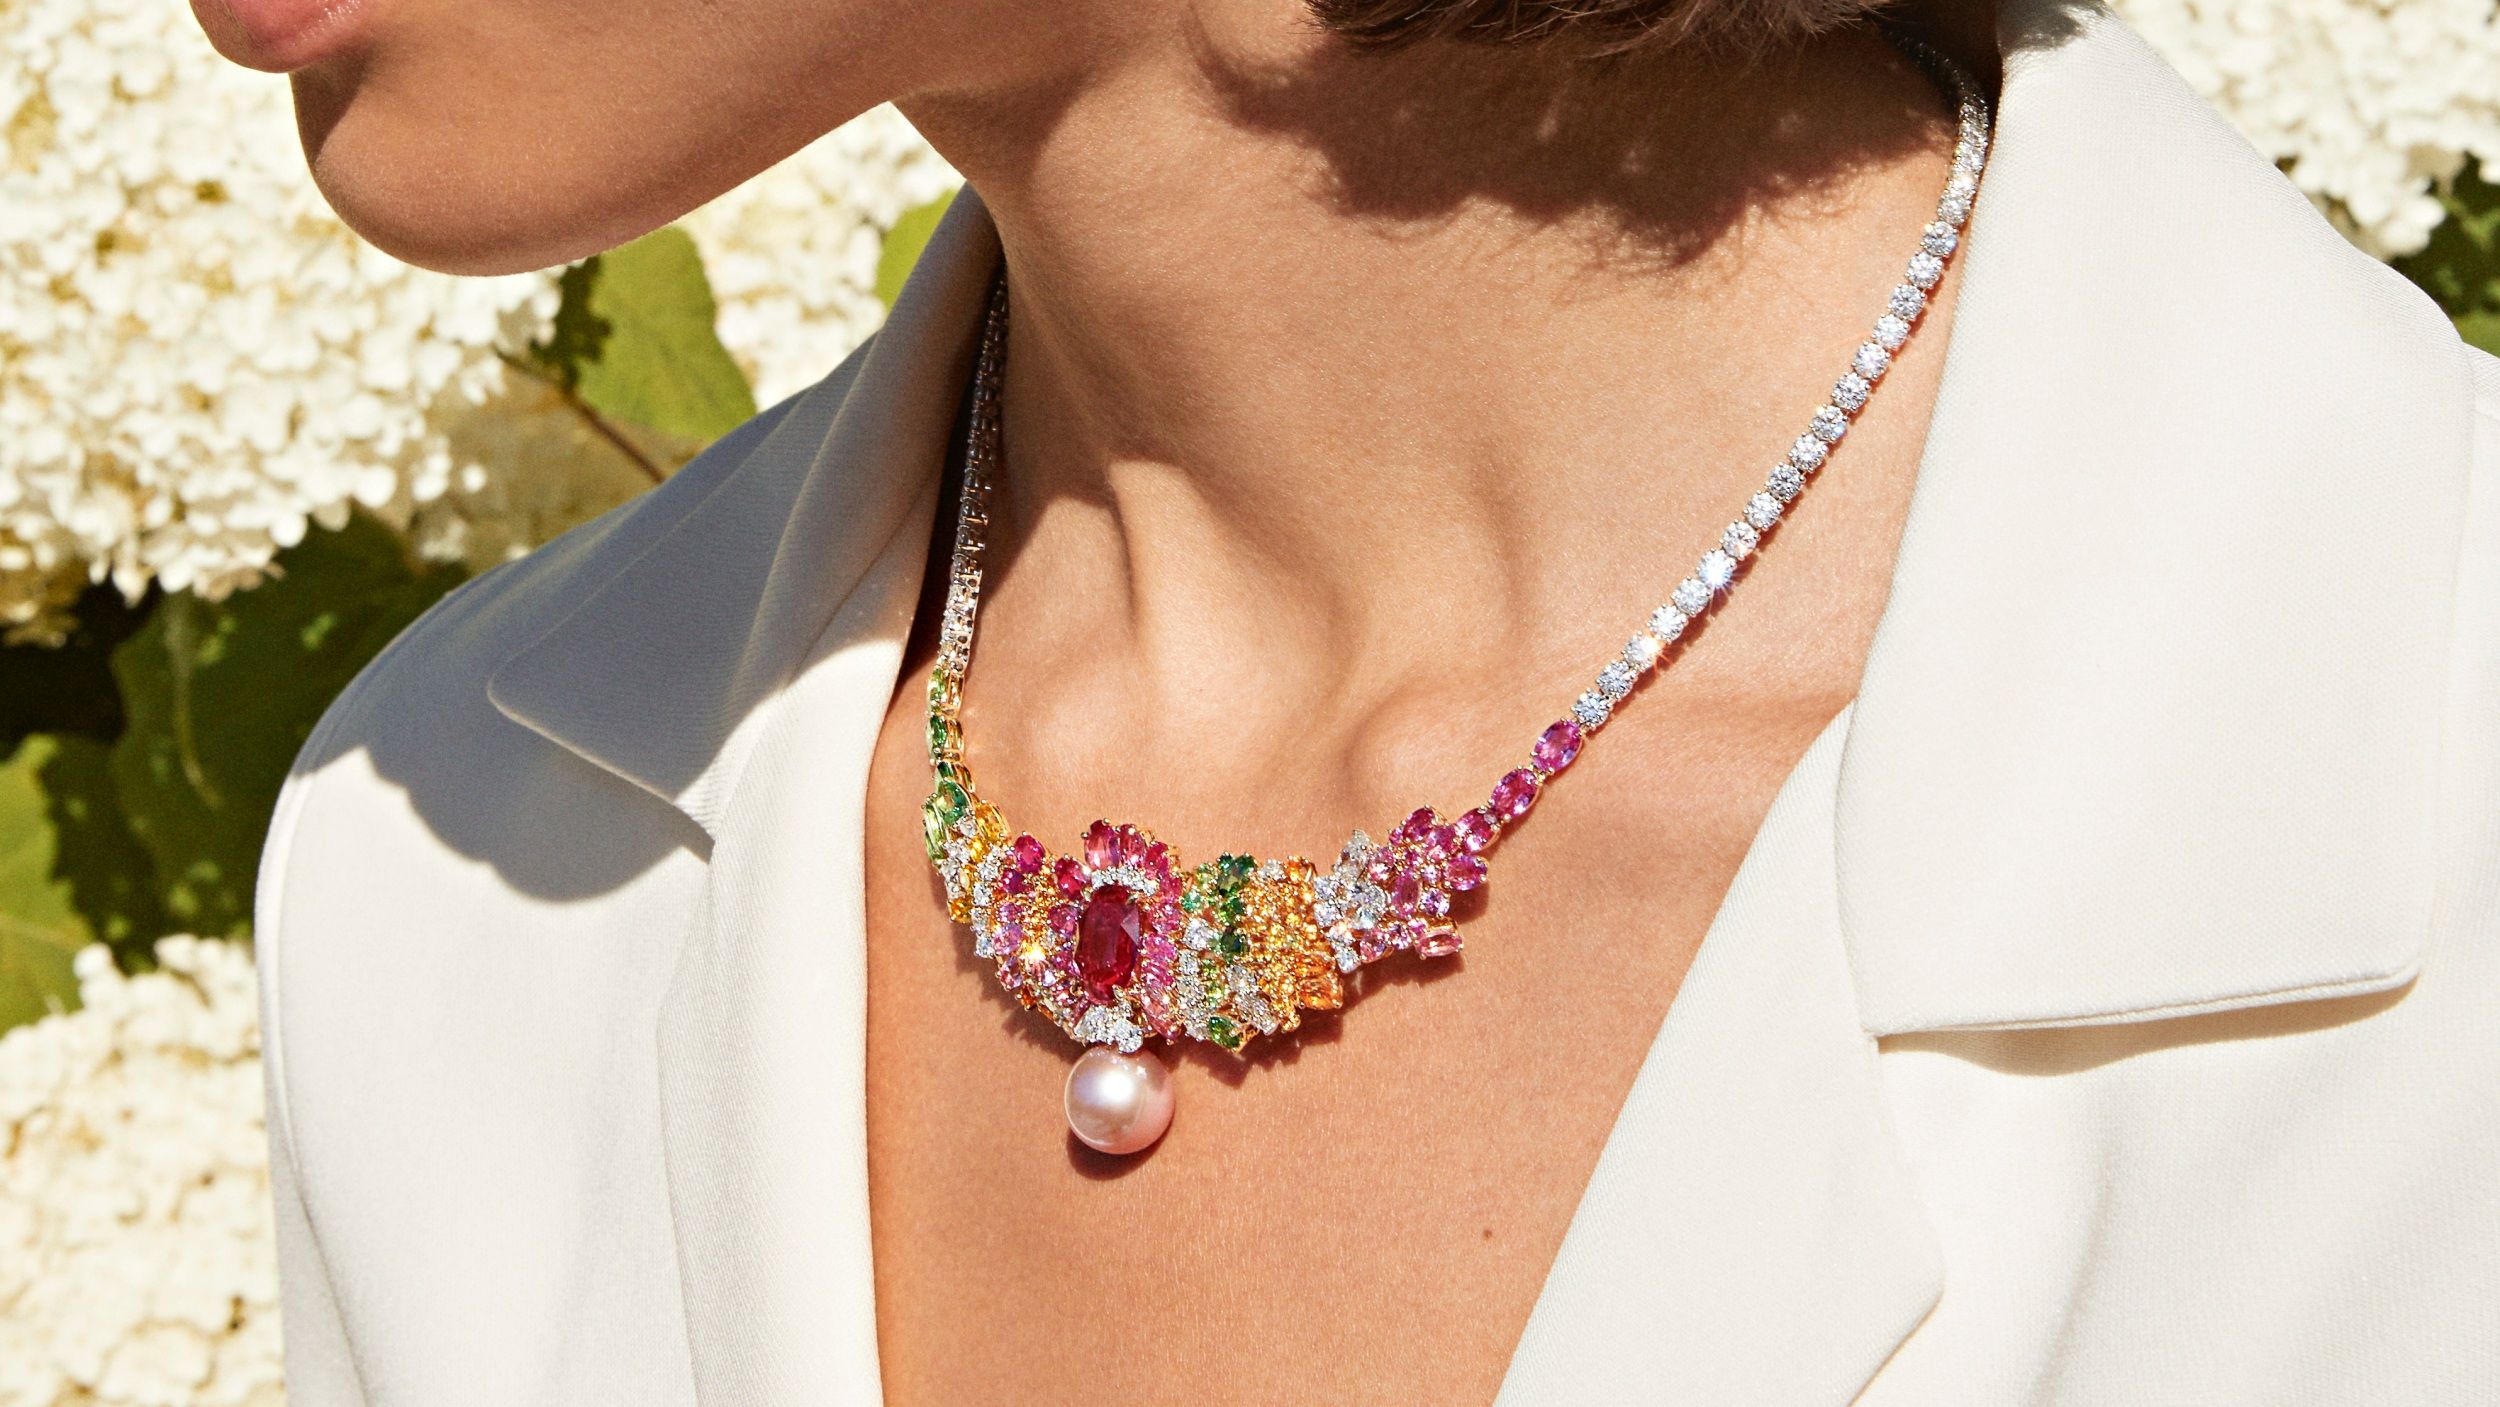 Dior's New Rainbow-Hued High Jewelry Collection Is a Maximalist's Dream